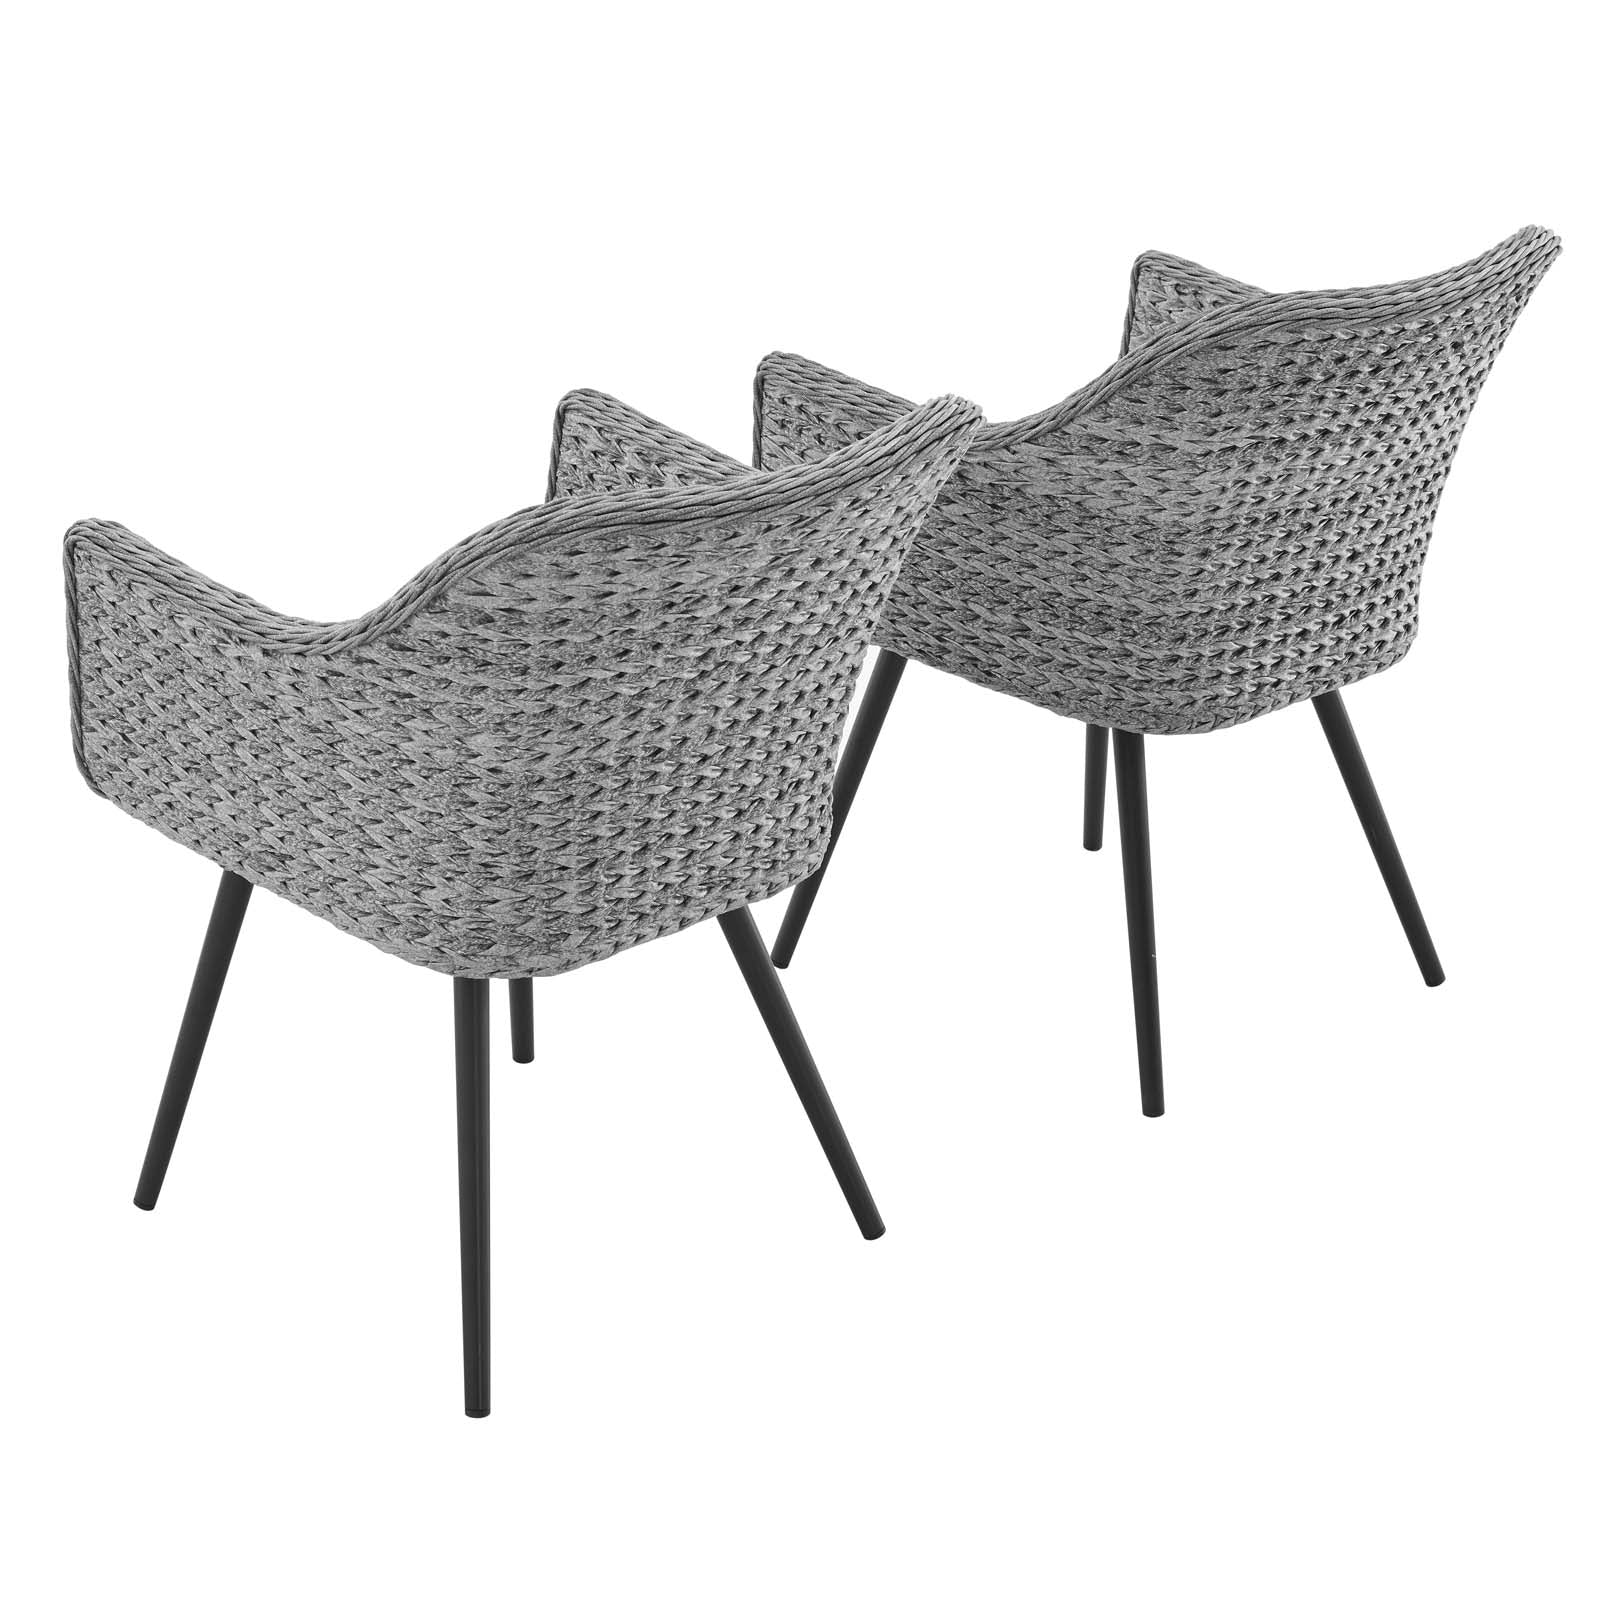 Endeavor Dining Armchair Outdoor Patio Wicker Rattan Set of 2 - East Shore Modern Home Furnishings